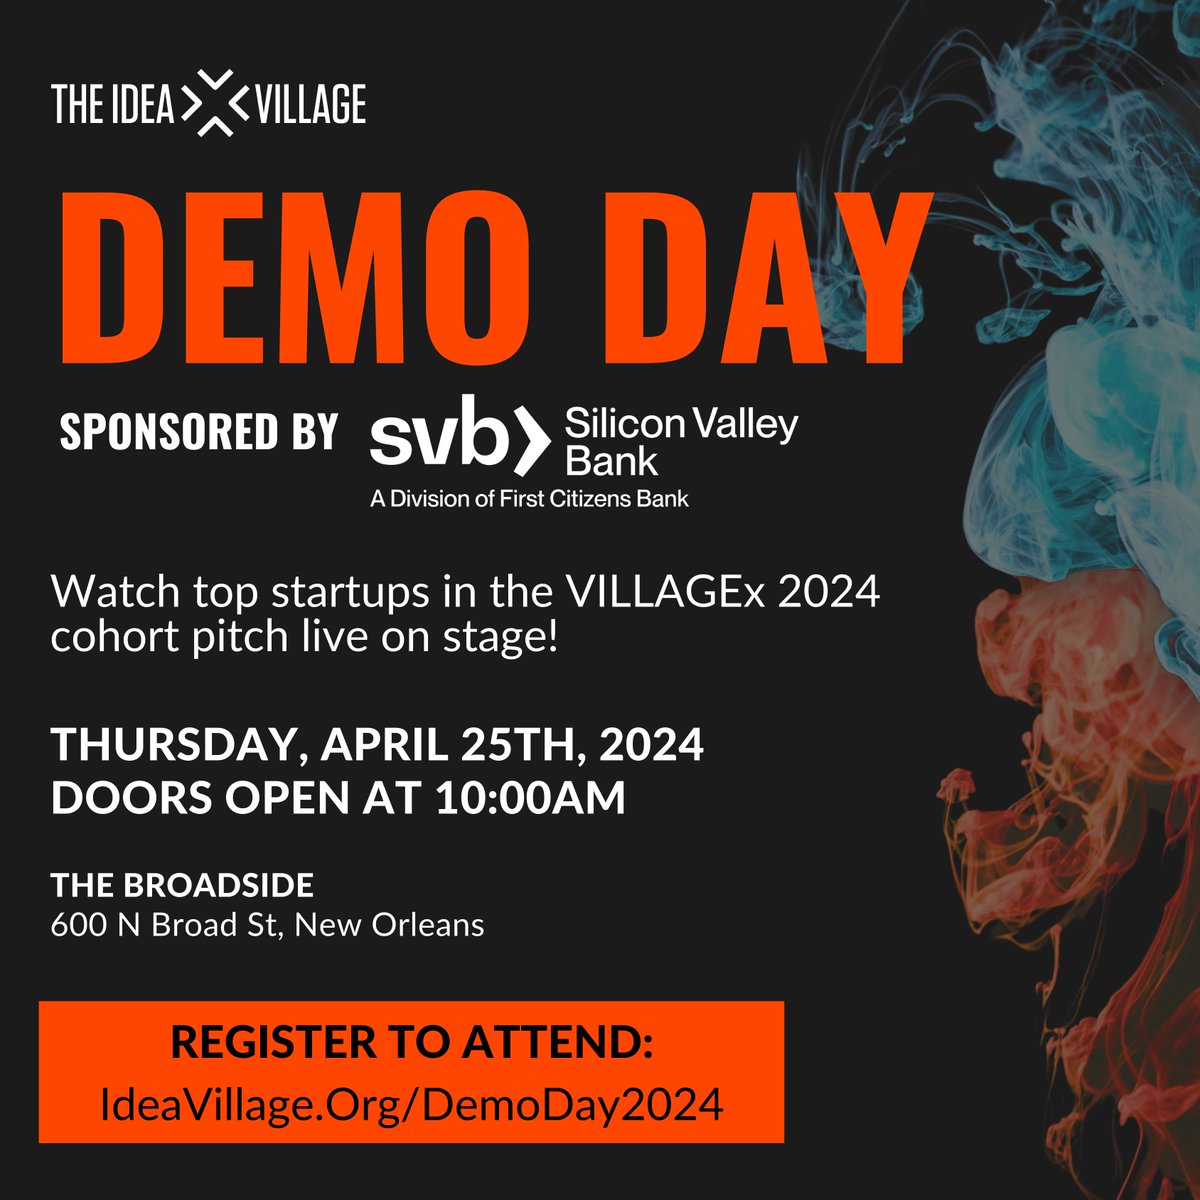 See you soon! Doors open at 10:00am. Pitches begin sharply at 10:30am. ideavillage.org/demoday2024 #DemoDay #SiliconValleyBank #Innovation